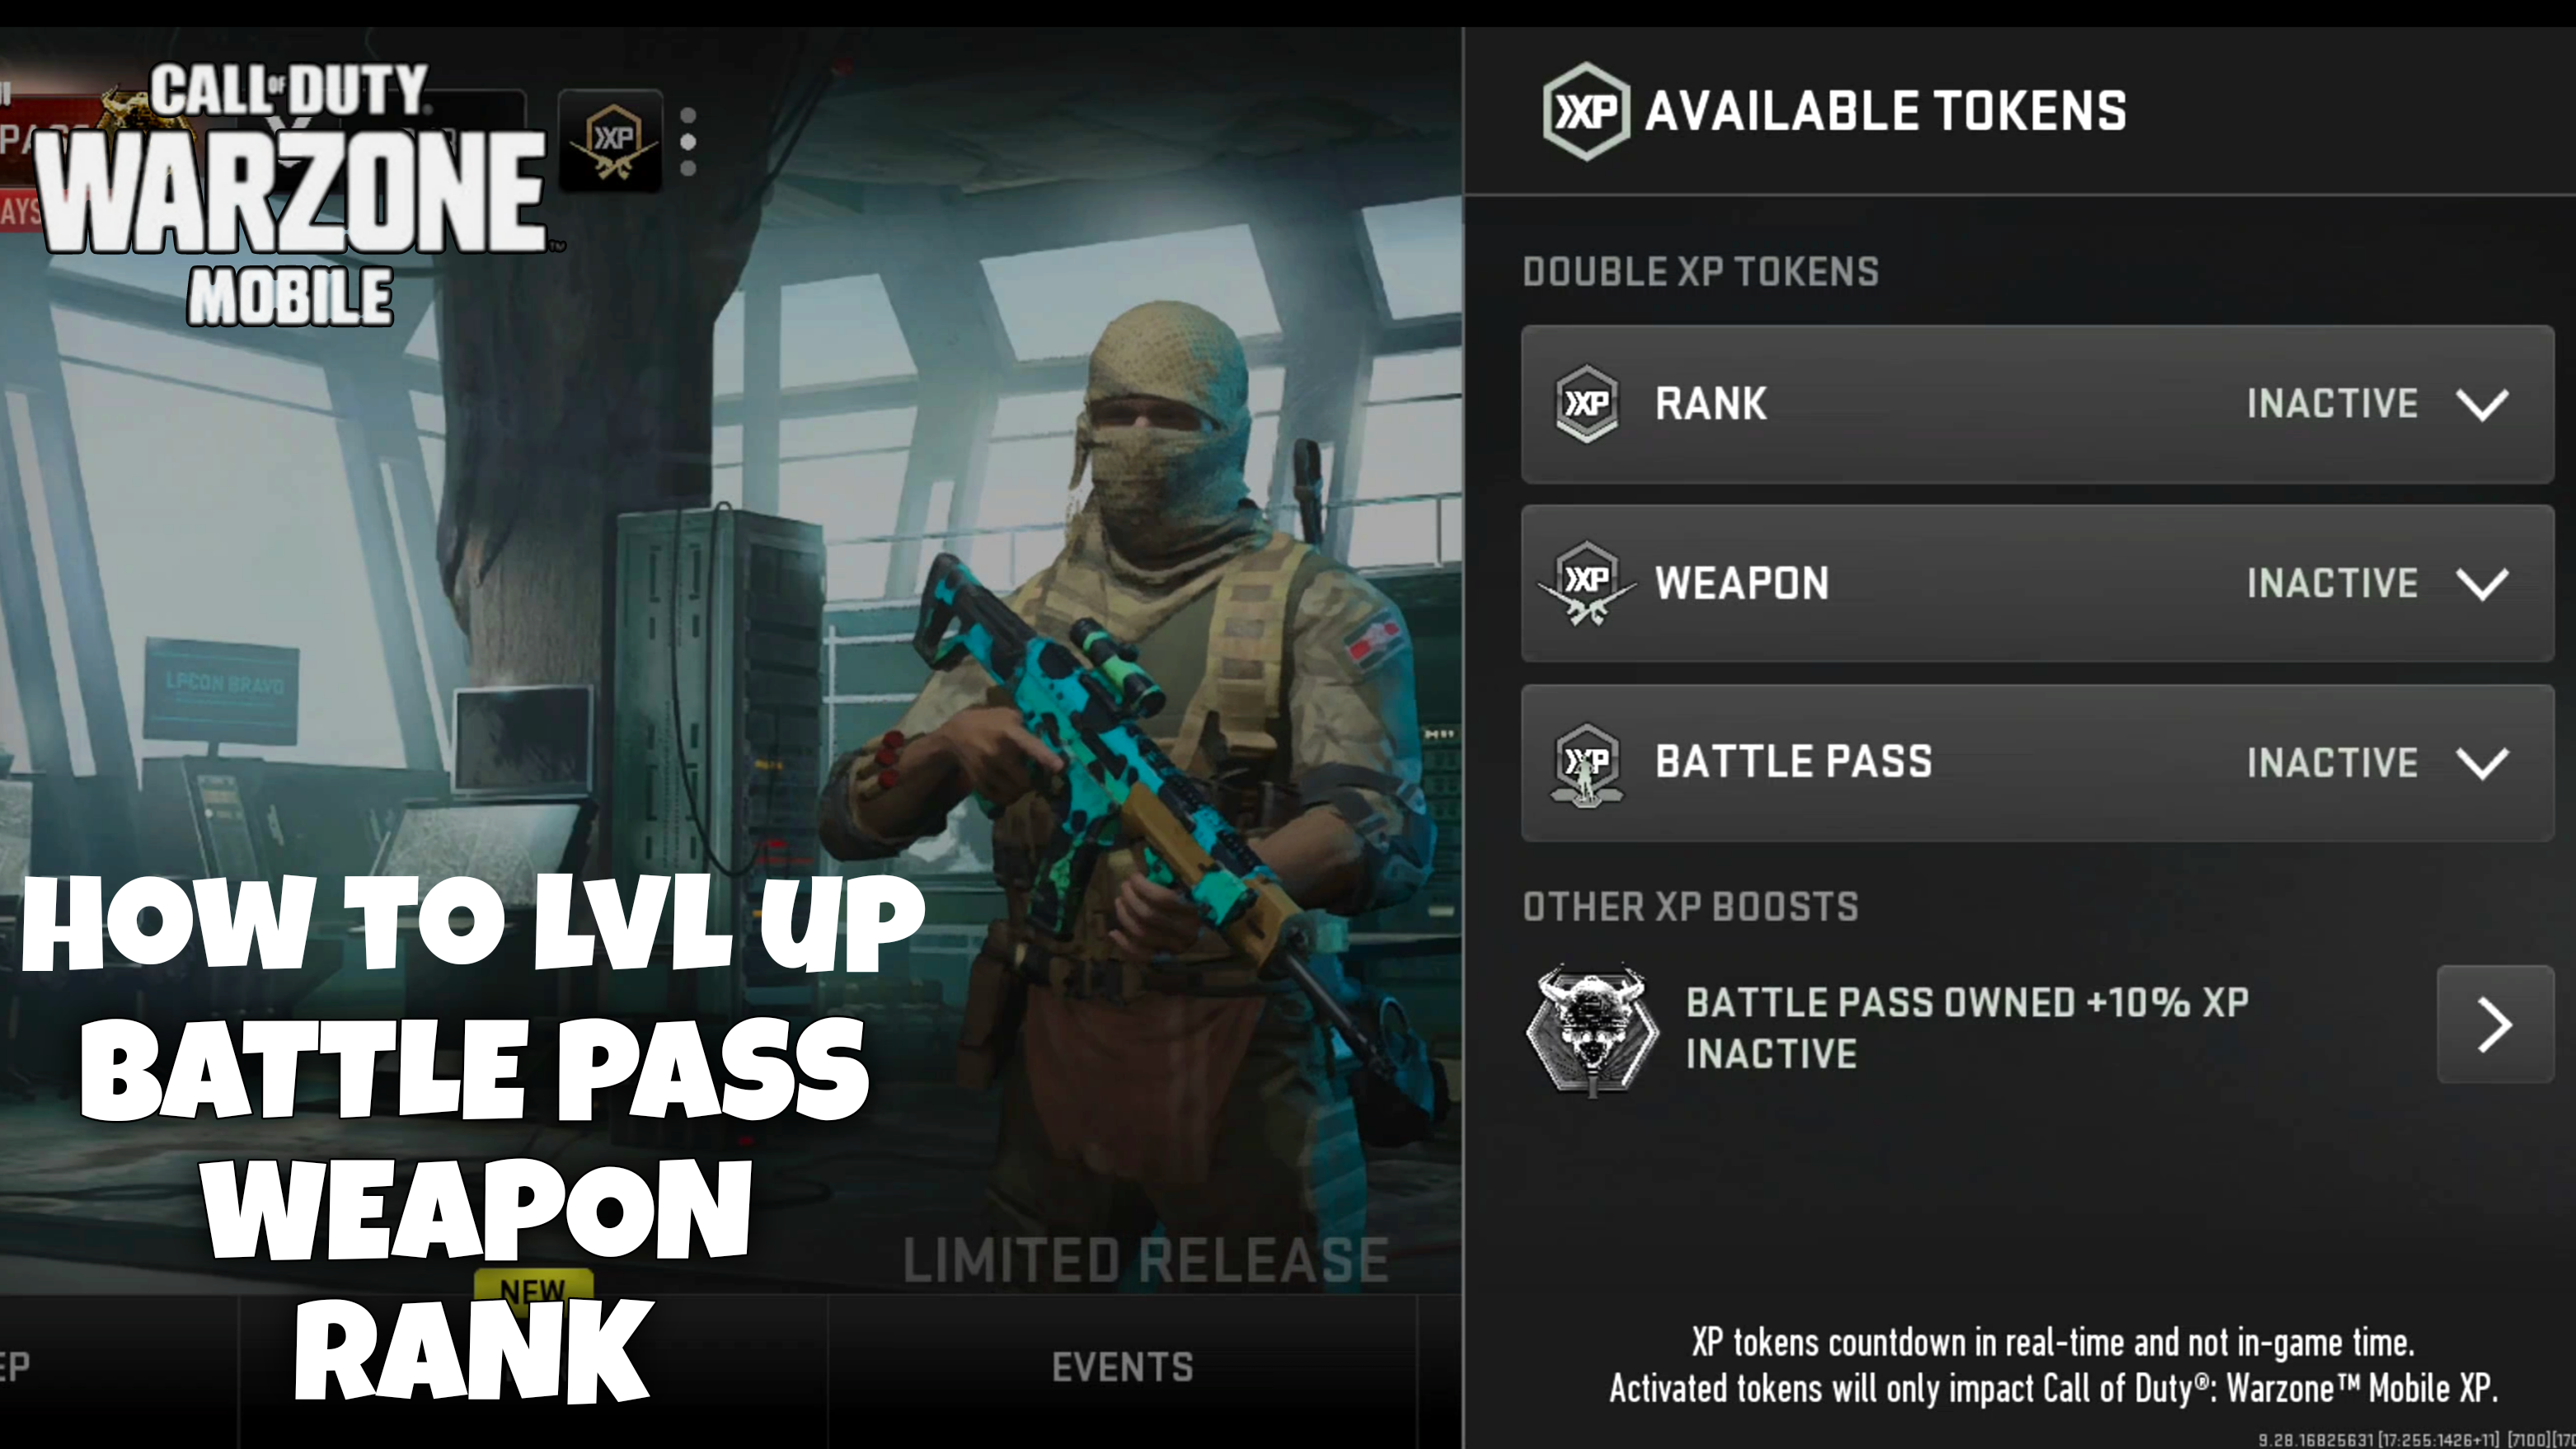 HOW TO LVl UP BATTLE PASS WEAPON RANK WARZONE MOBILE